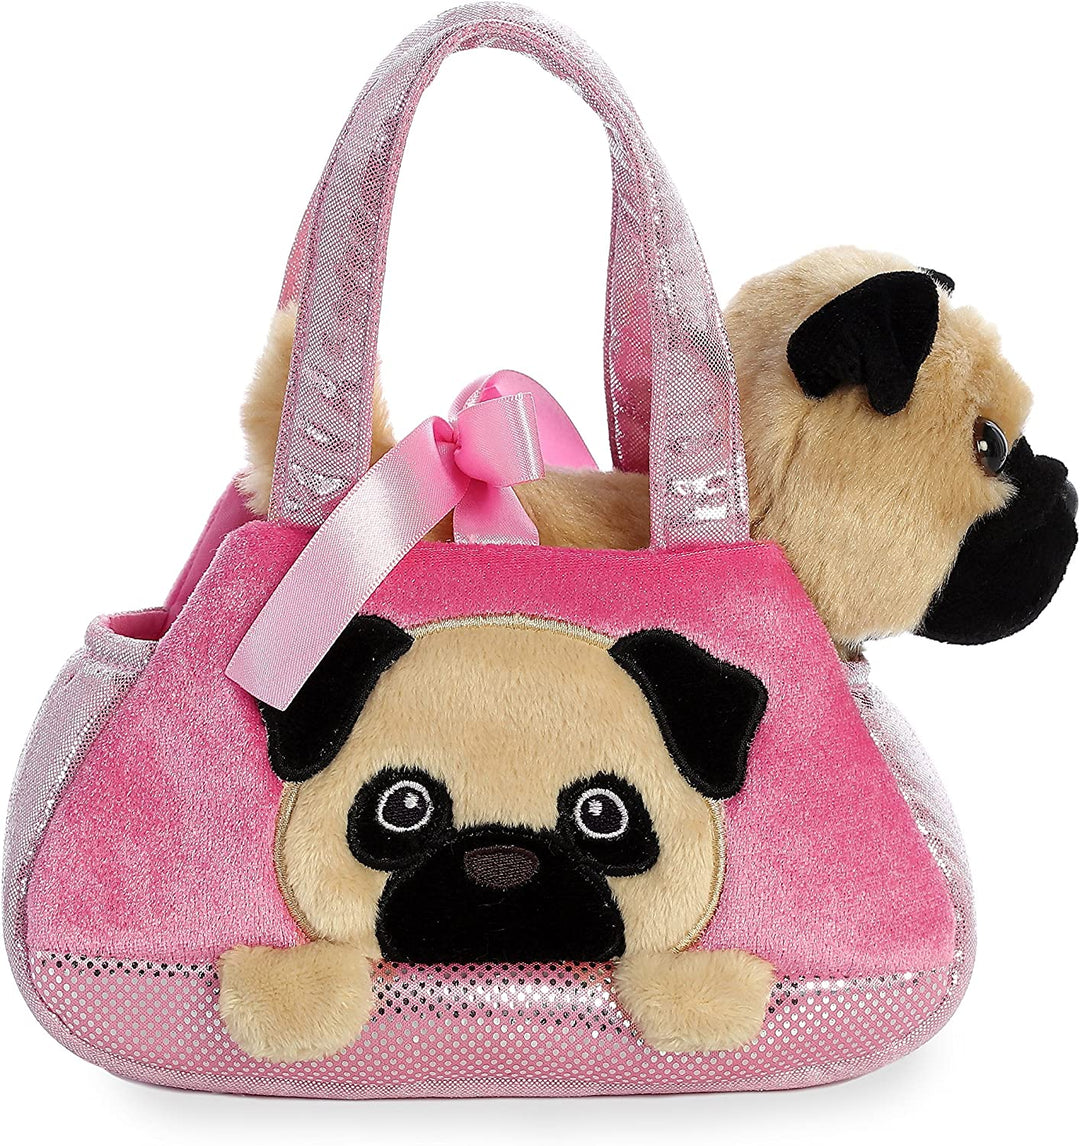 AURORA, 32841, Fancy Pal, Peek-A-Boo Pug Dog, 8In, Soft Toy, Pink and Brown